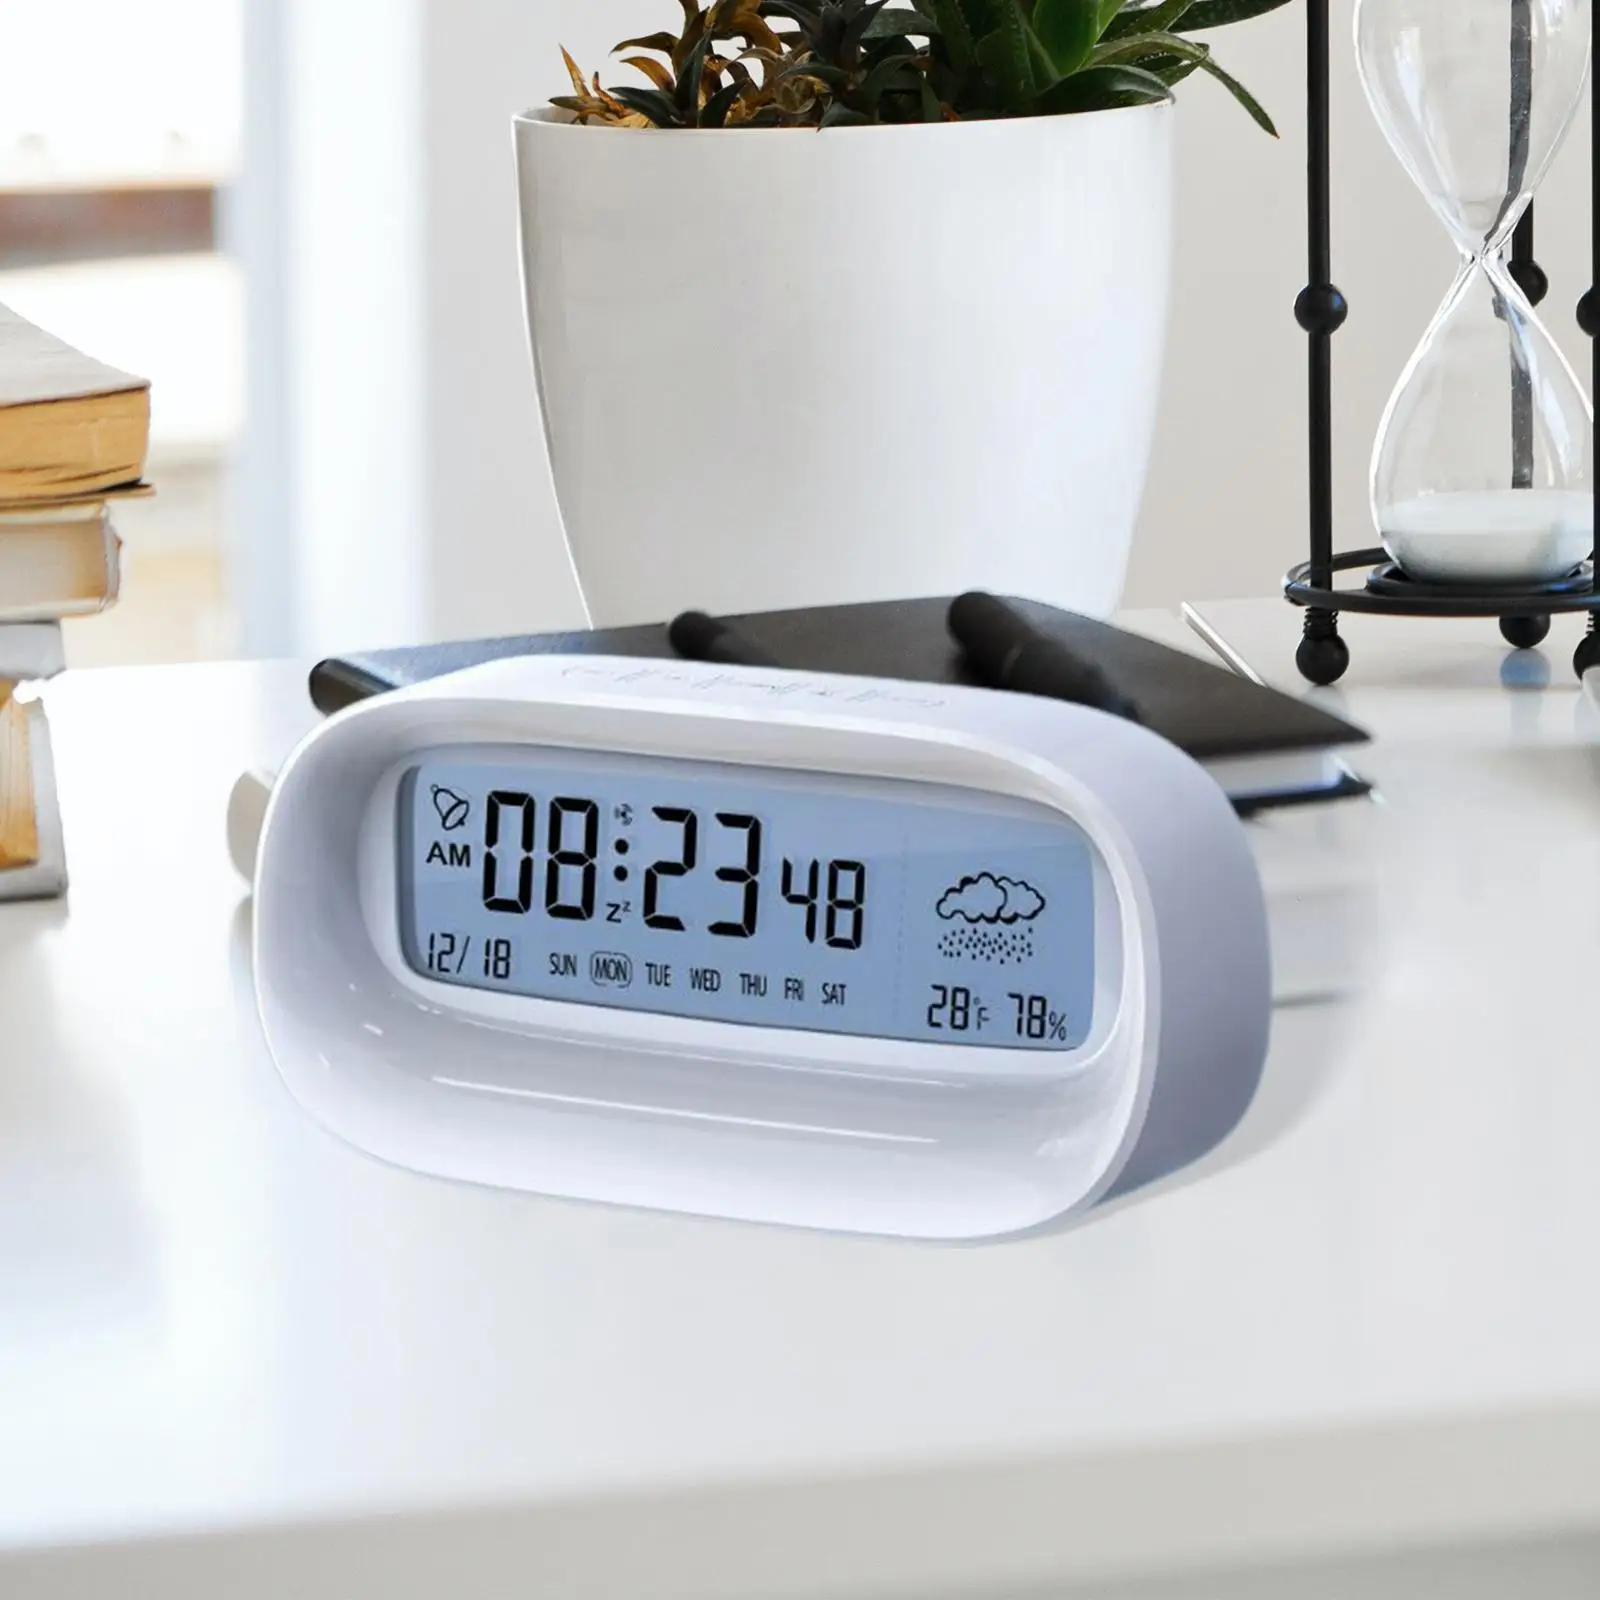 Desk Digital Alarm Clock Large Display with Date, Time and Week with Seconds Weathers Station for Kitchen Bedside Bedroom